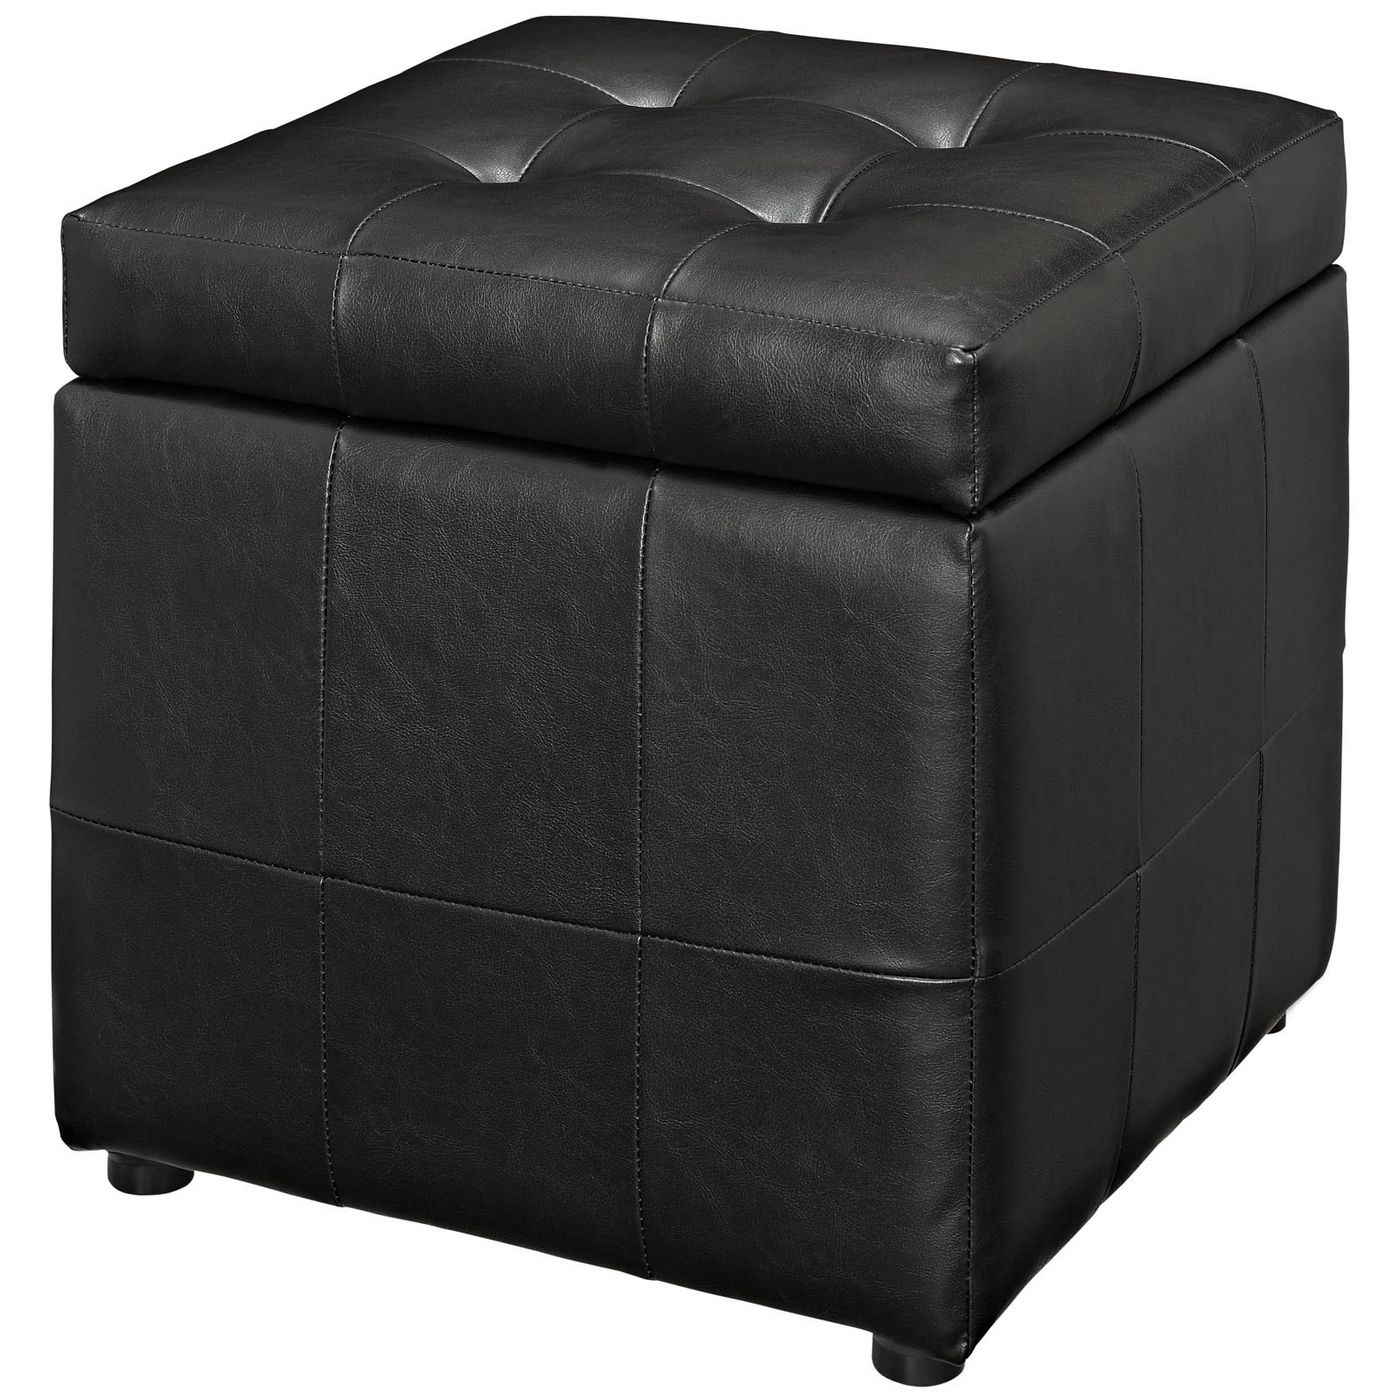 Popular Volt Contemporary Upholstered Button Tufted Storage Ottoman, Black Regarding Black And White Zigzag Pouf Ottomans (View 7 of 10)